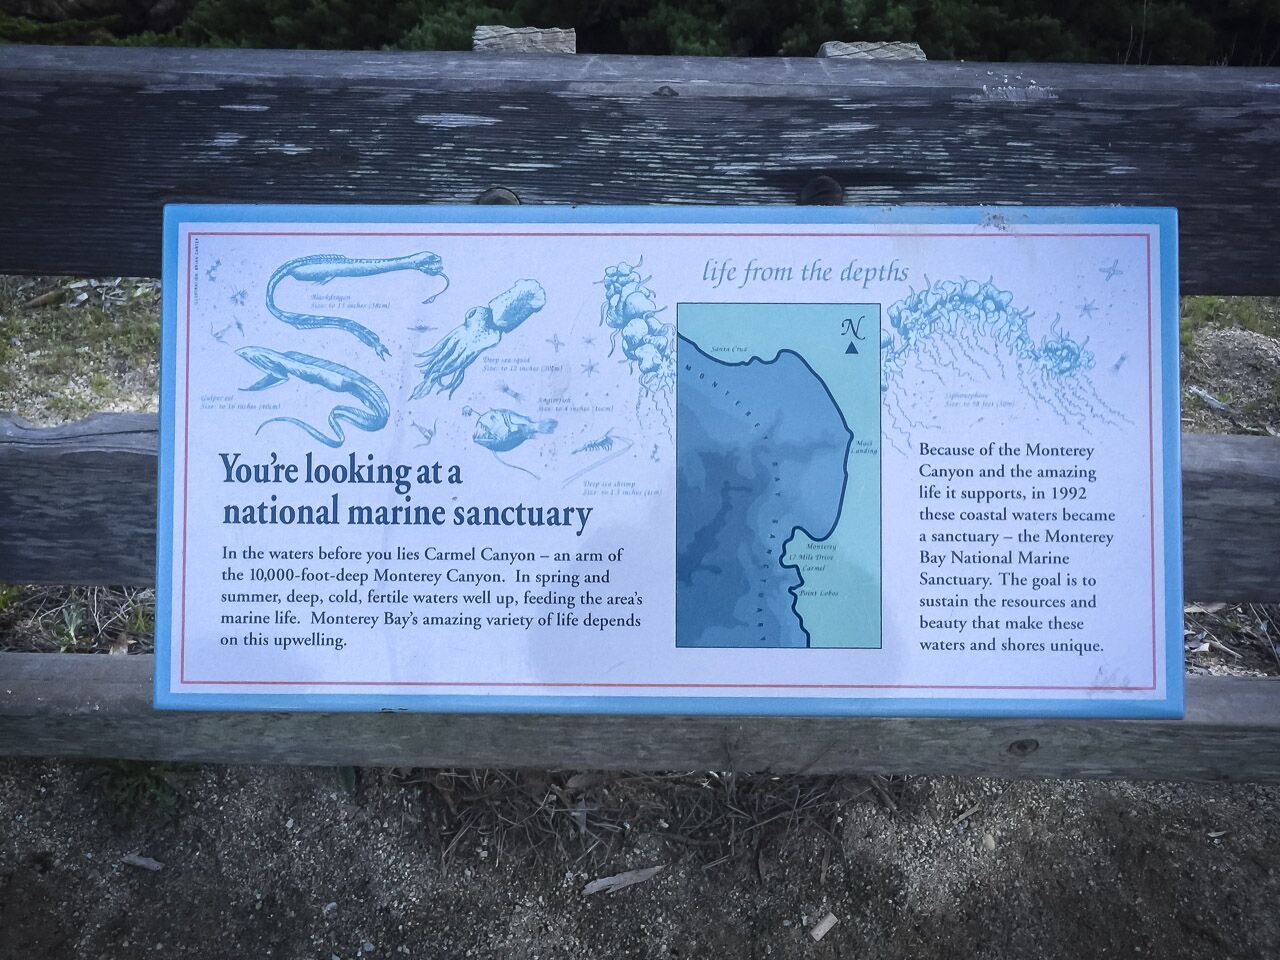 Pacific Grove Marine Gardens Conservation Area